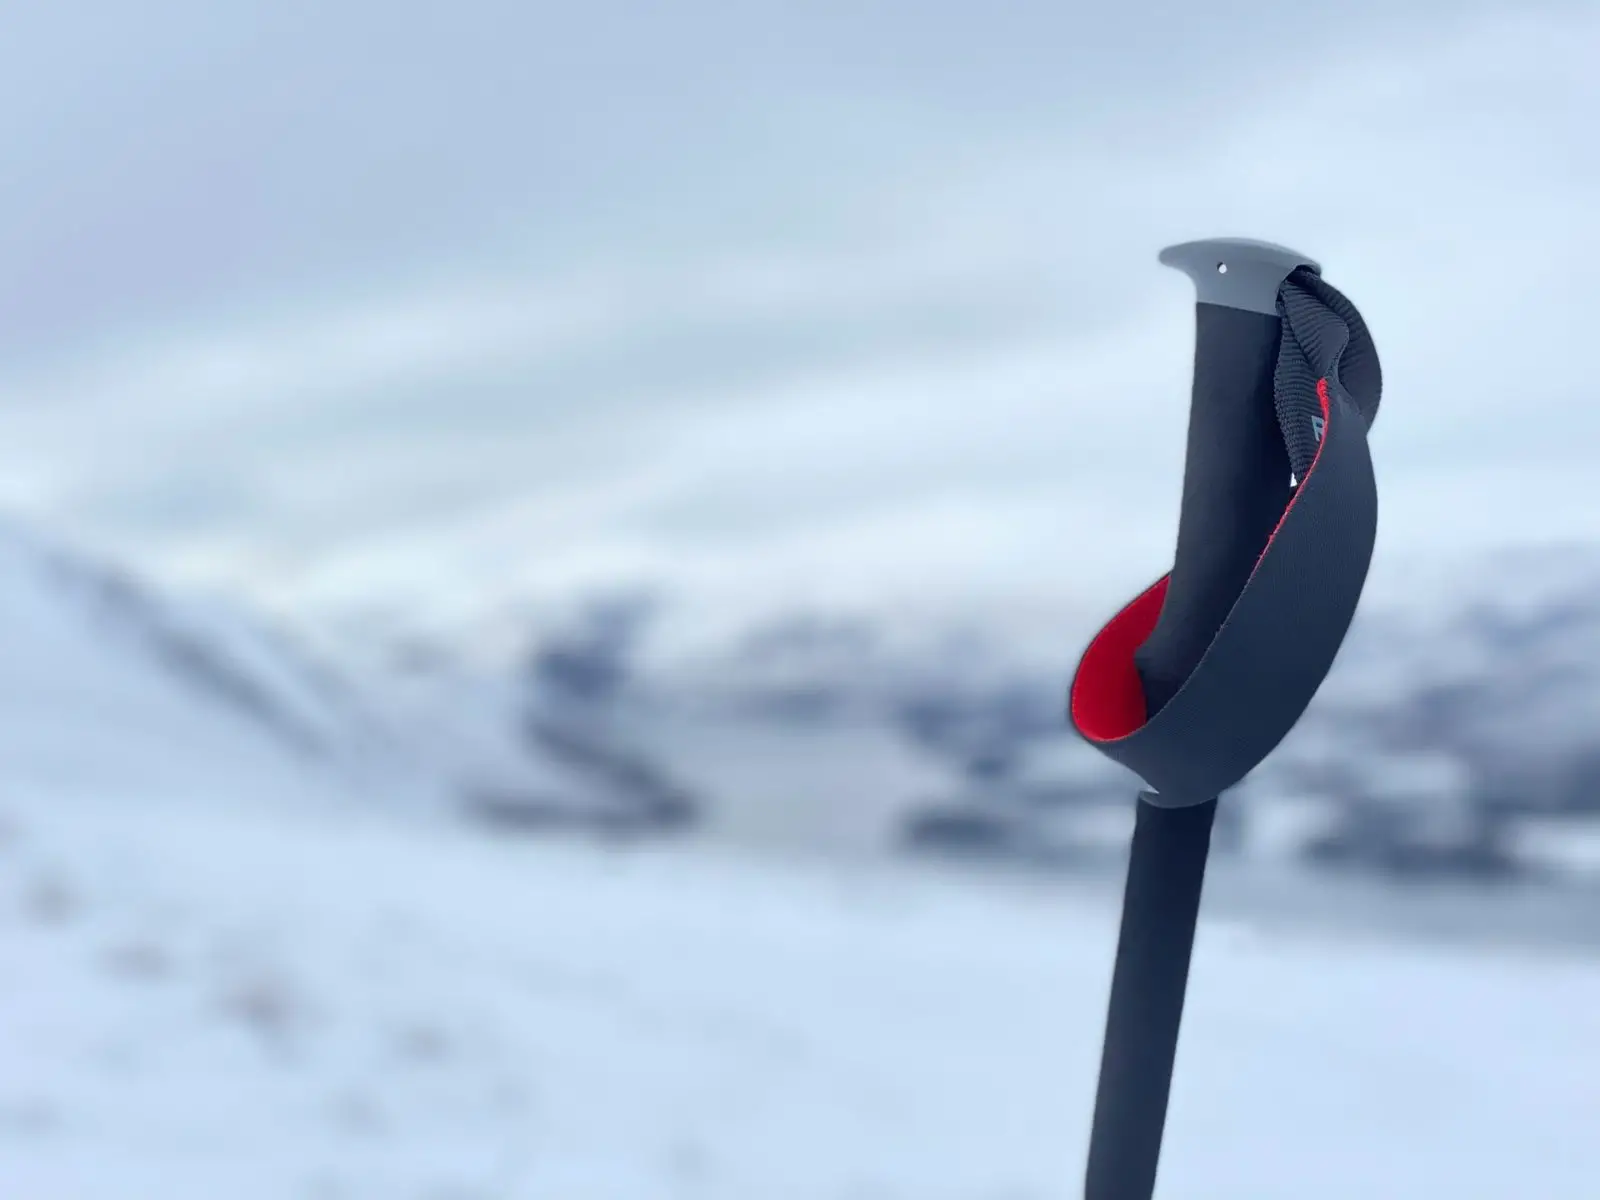 Foam grips are a great choice if you're looking for budget snowshoe poles under $100